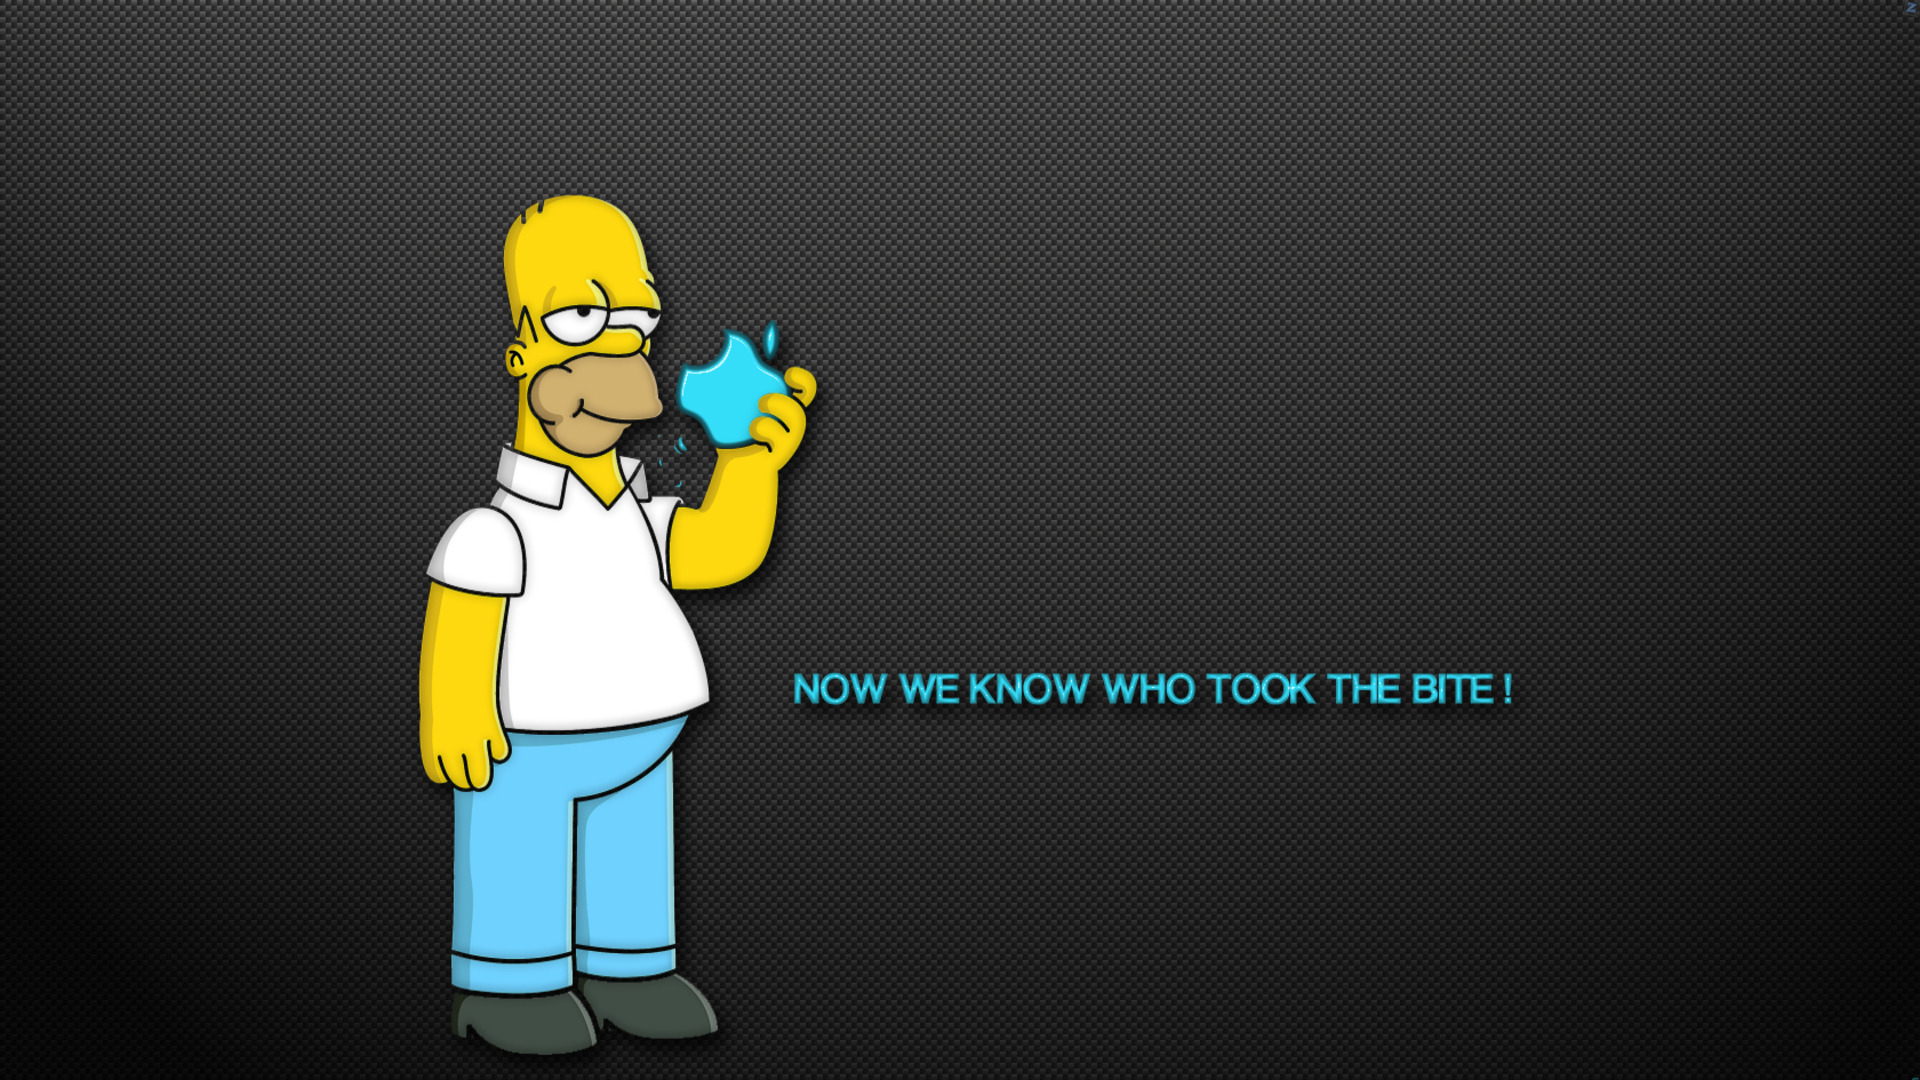  Homer Apple humor funny text quotes cartoon wallpaper background